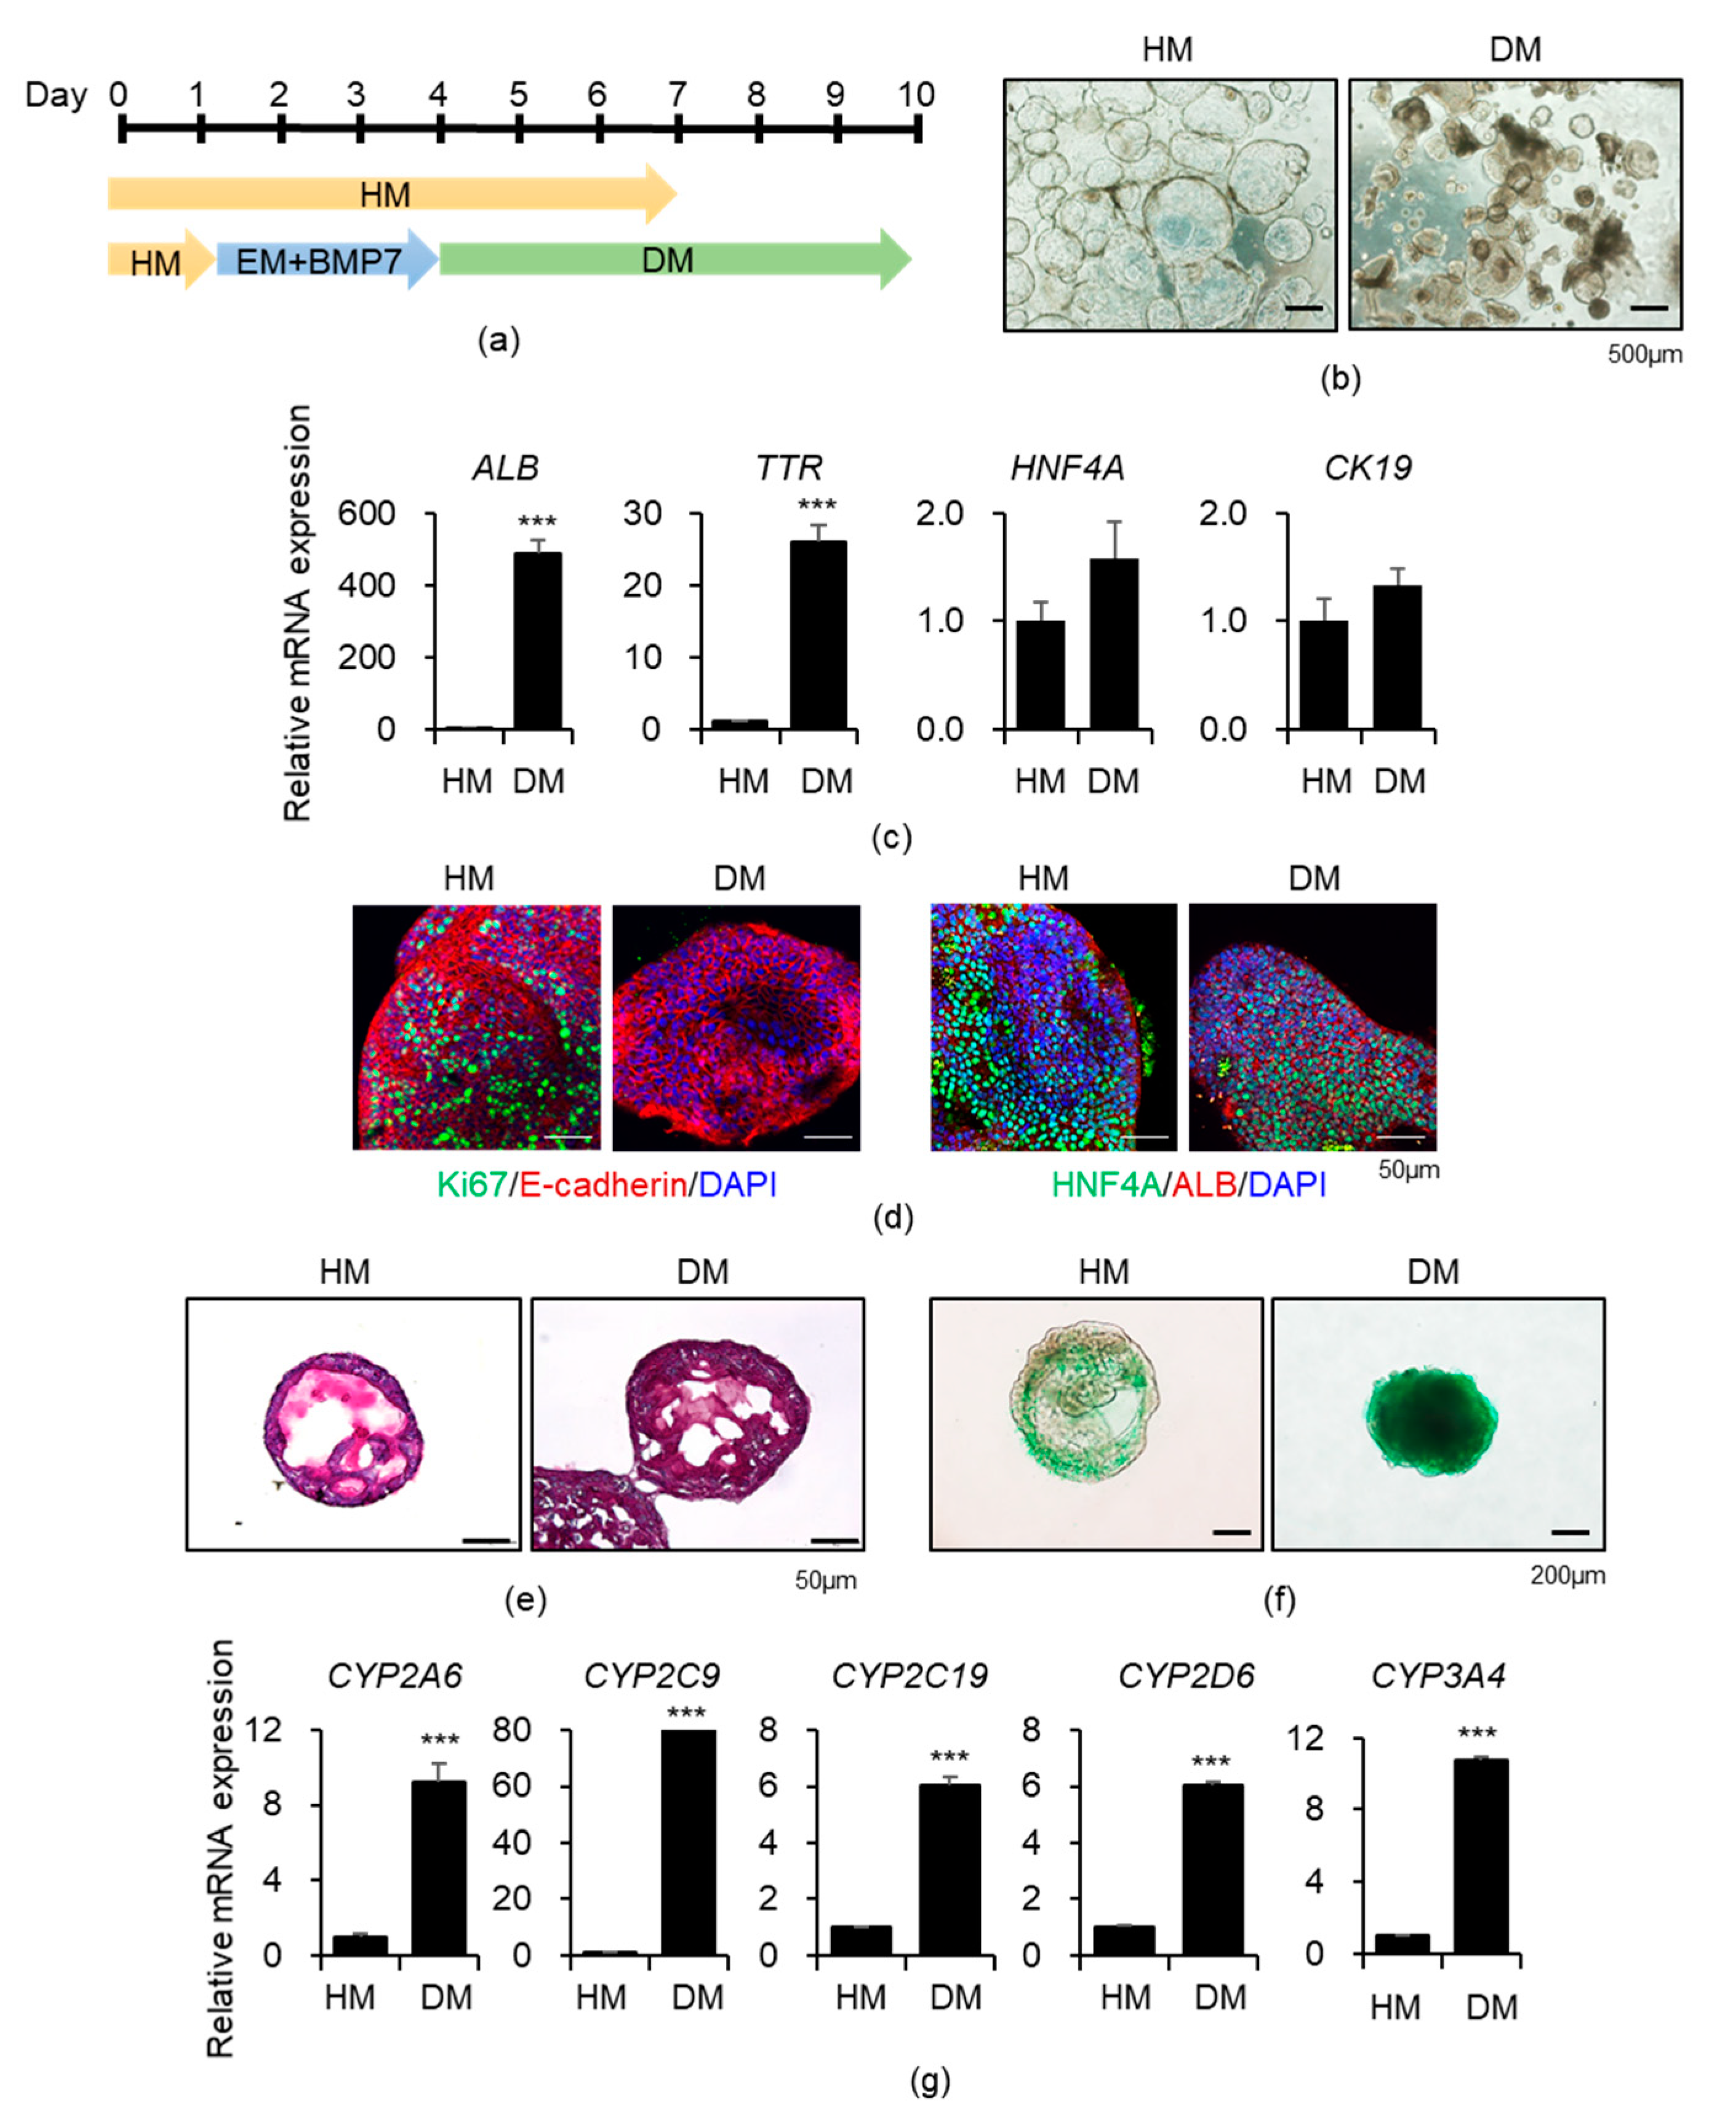 Cells | Free Full-Text | Effect of Microbial Short-Chain Fatty Acids on  CYP3A4-Mediated Metabolic Activation of Human Pluripotent Stem Cell-Derived  Liver Organoids | HTML